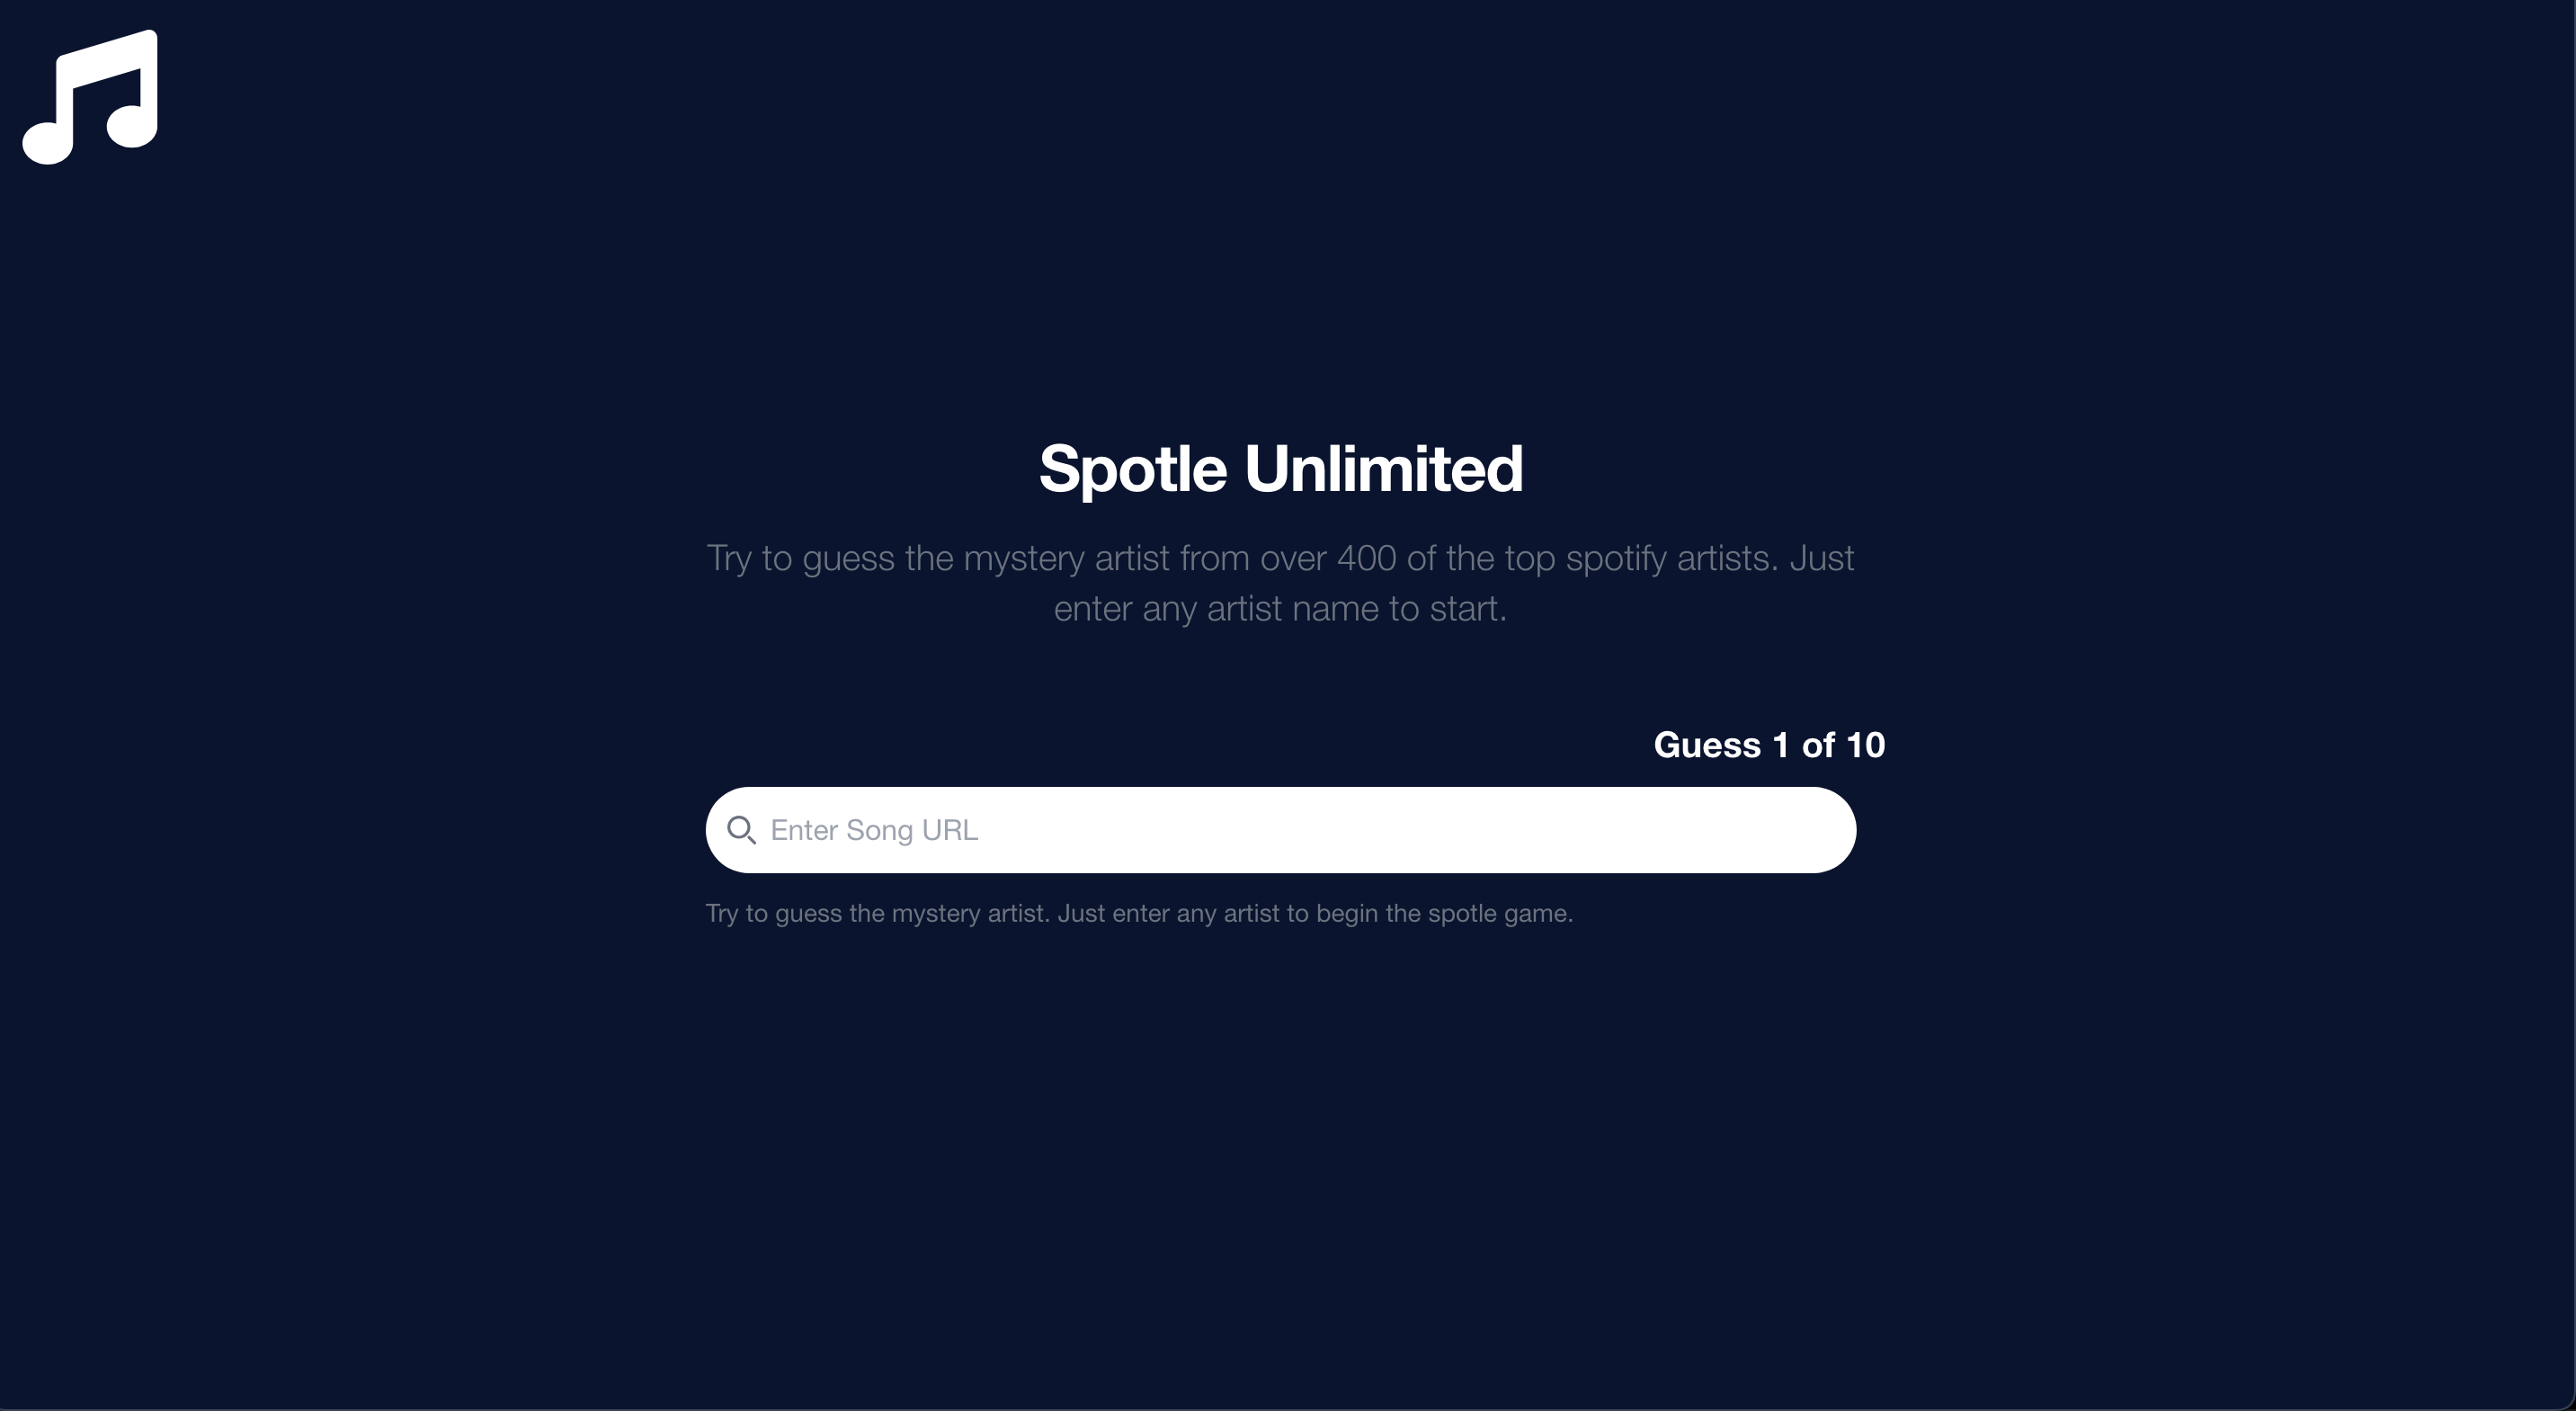 spotle - Unlimited spotify artist guessing game